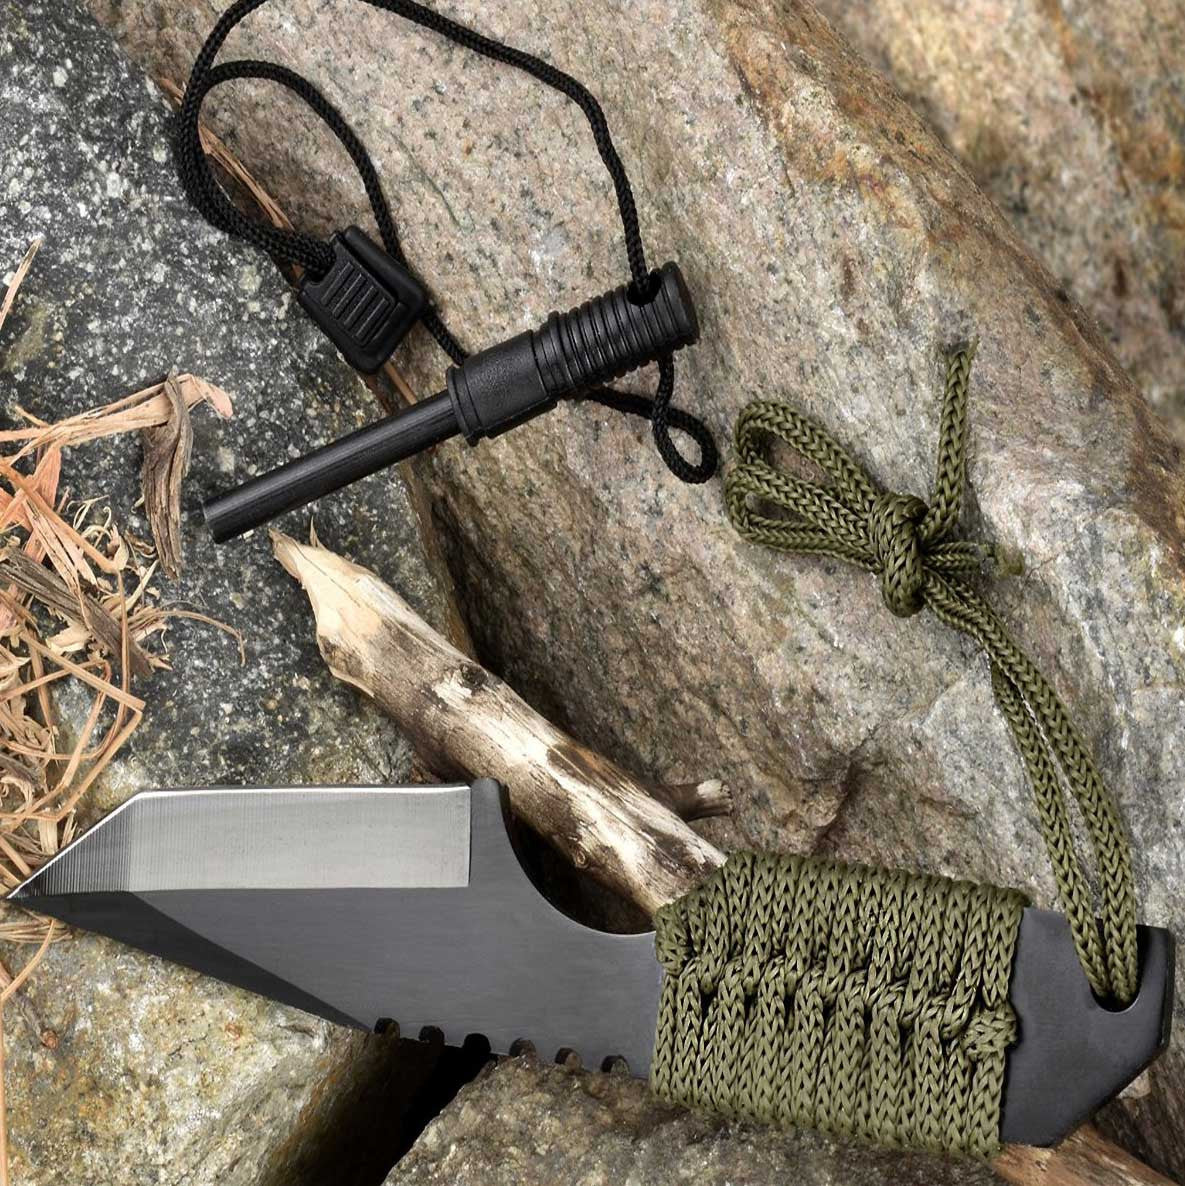 Tactical Knife With Fire Starter - OddGifts.com